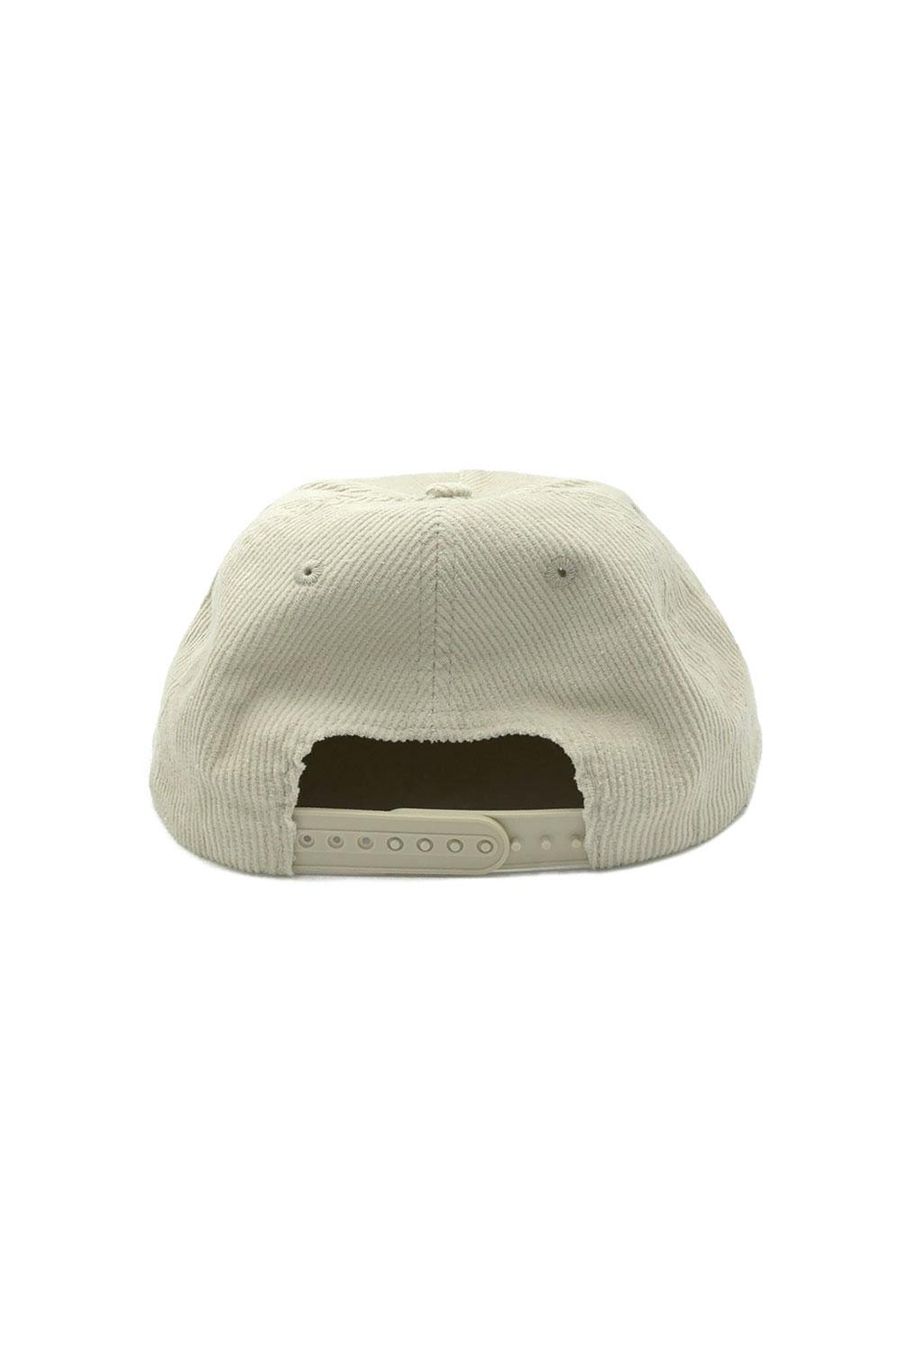 Don't Trip Corduroy Snapback Hat | Cream - Main Image Number 2 of 2